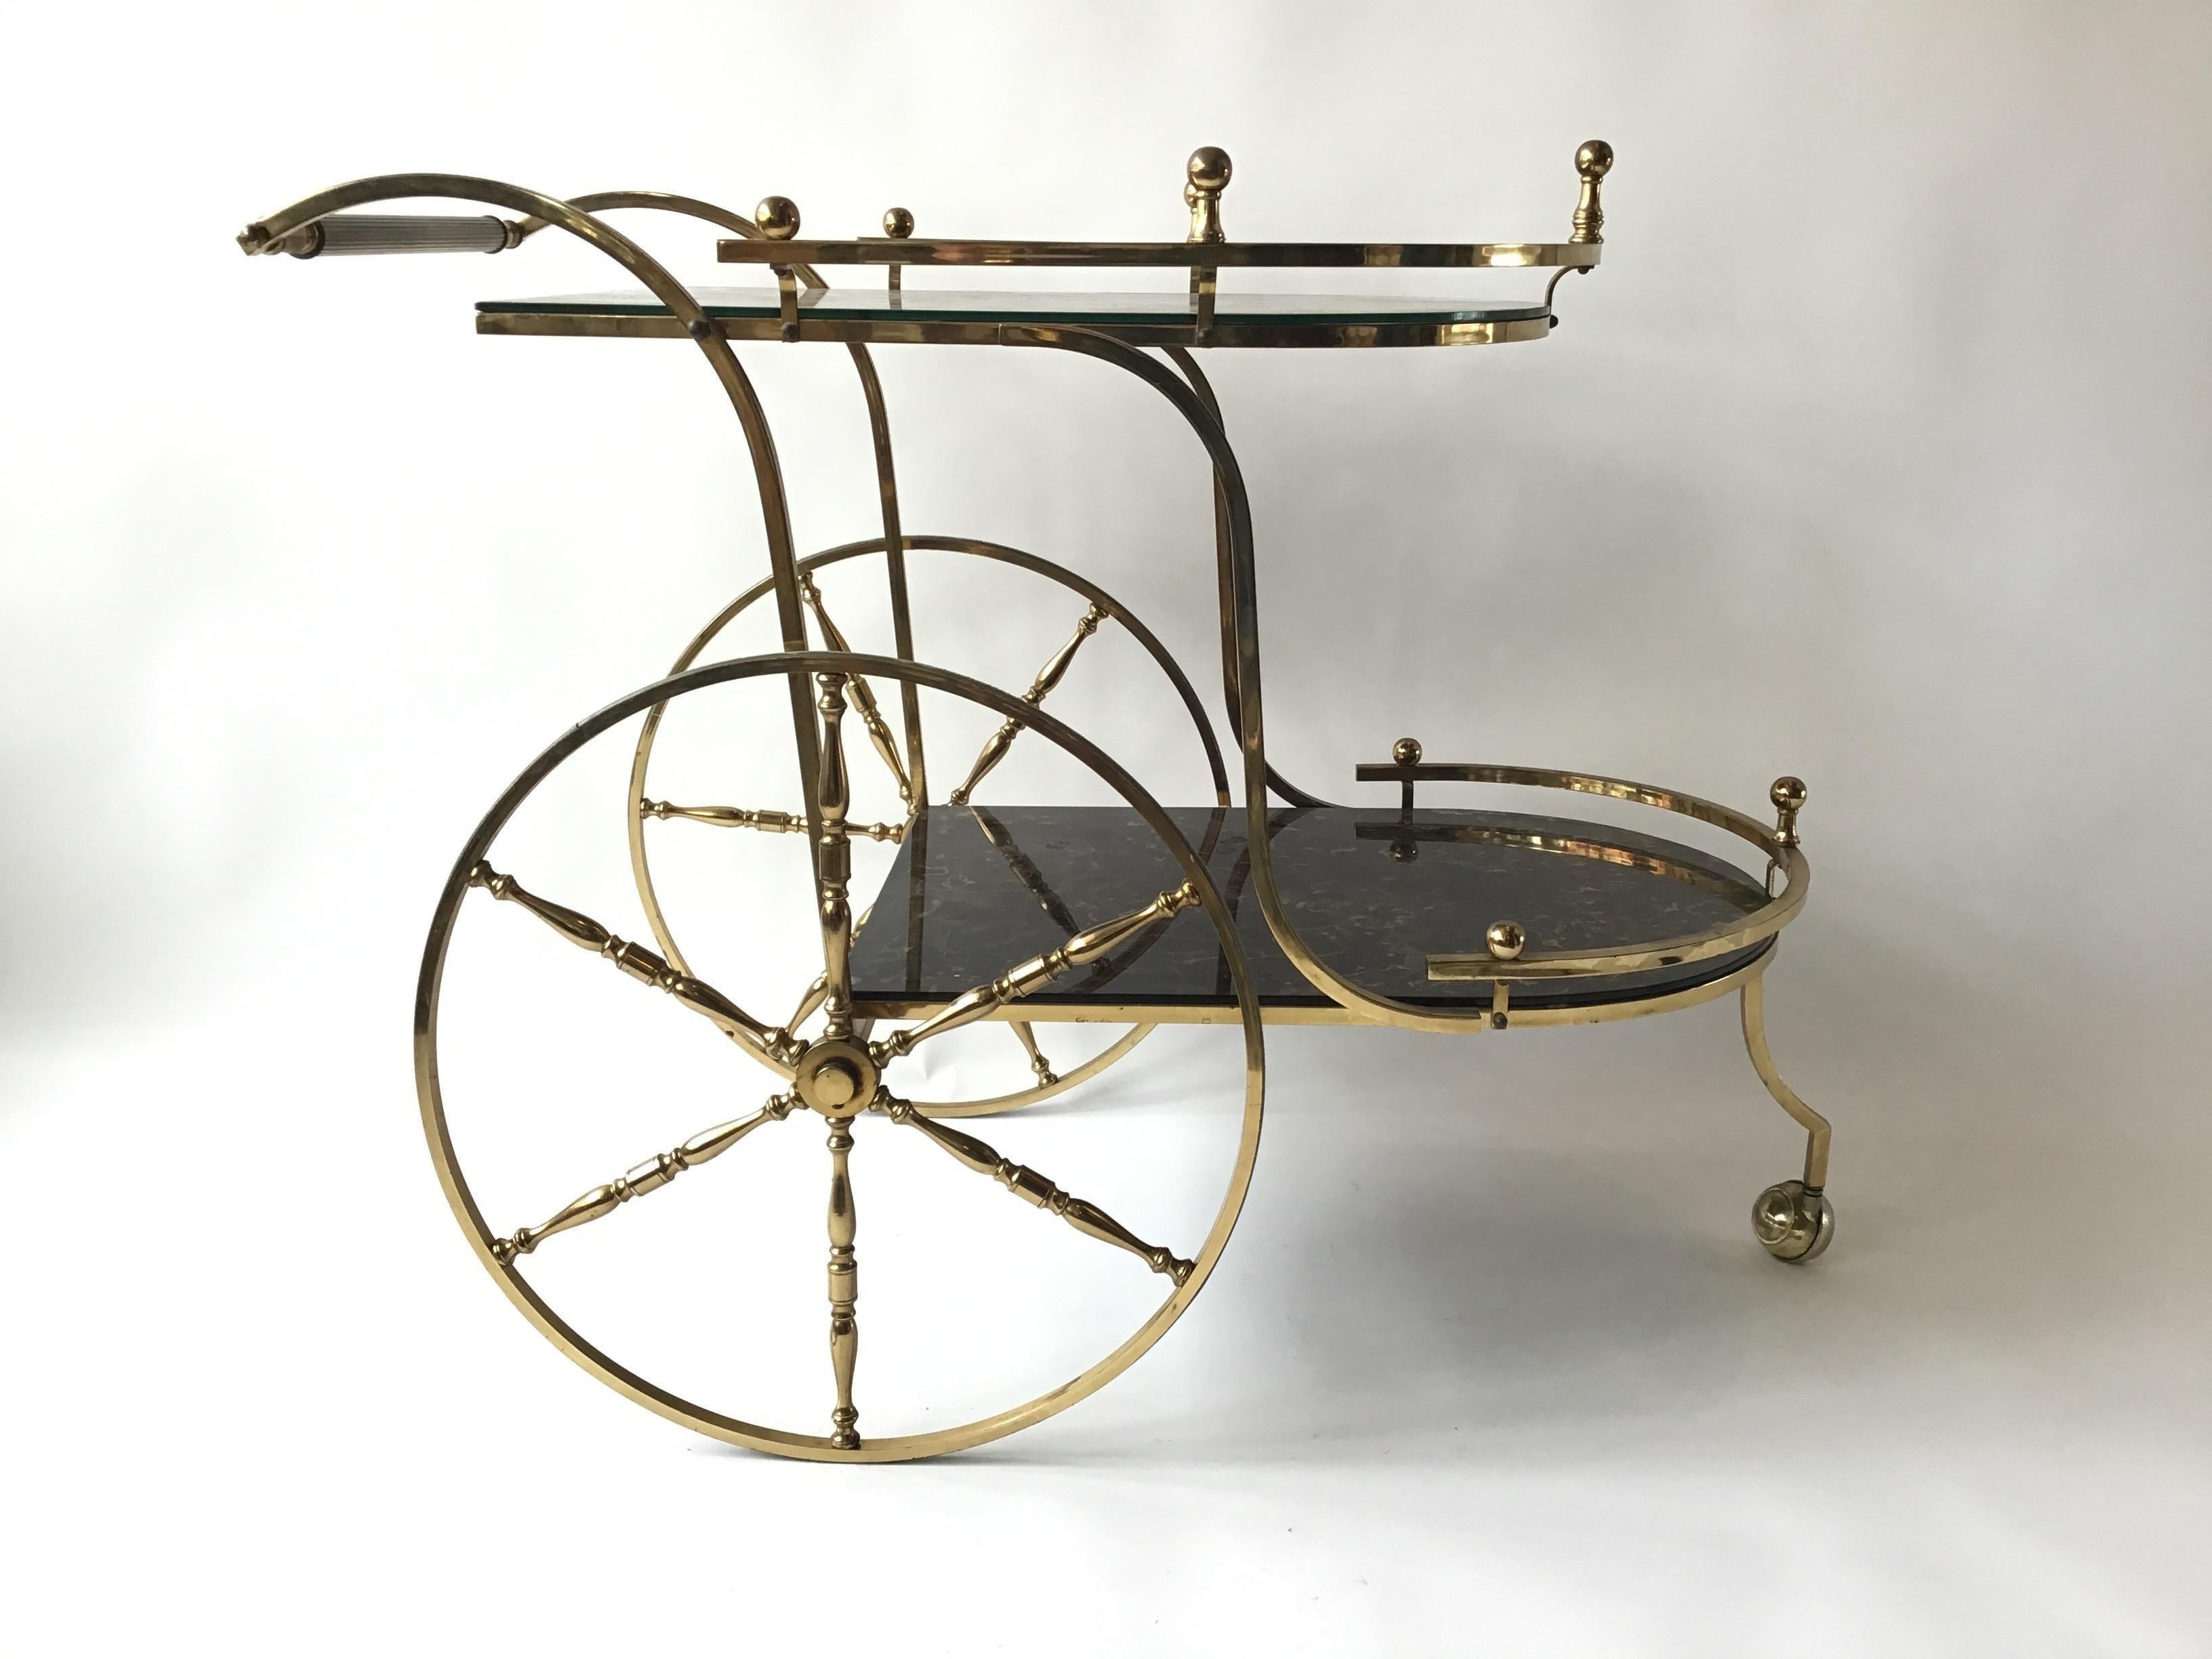 1970s brass bar cart. Marbelized paper applied to glass for shelves.